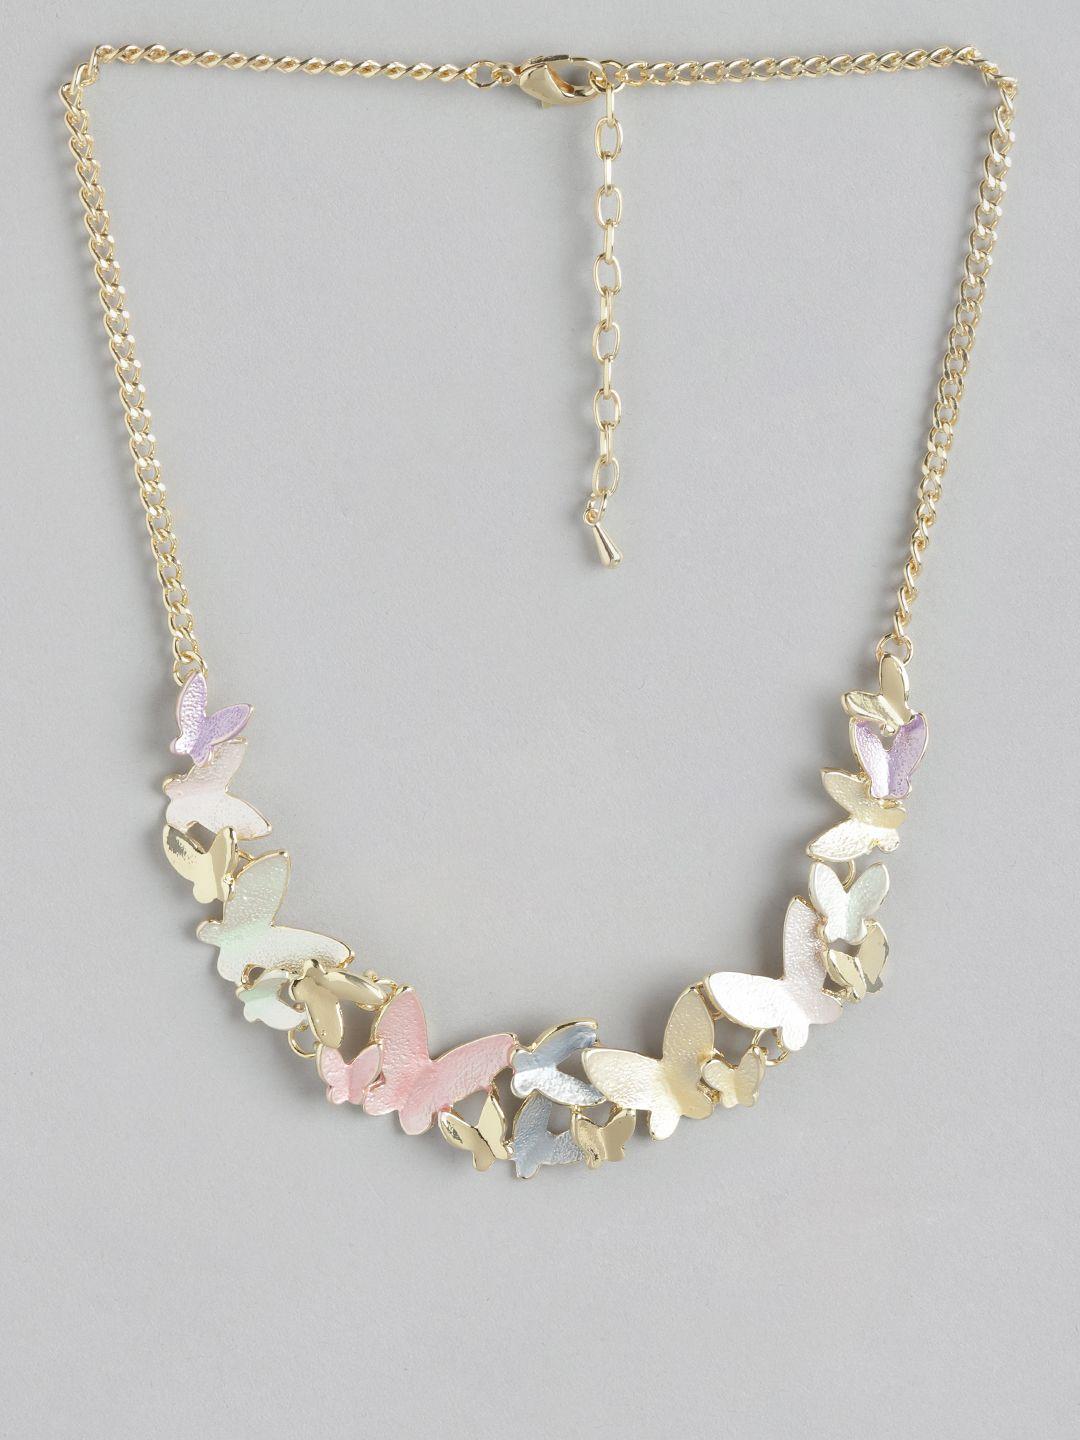 carlton london gold-plated enamelled necklace